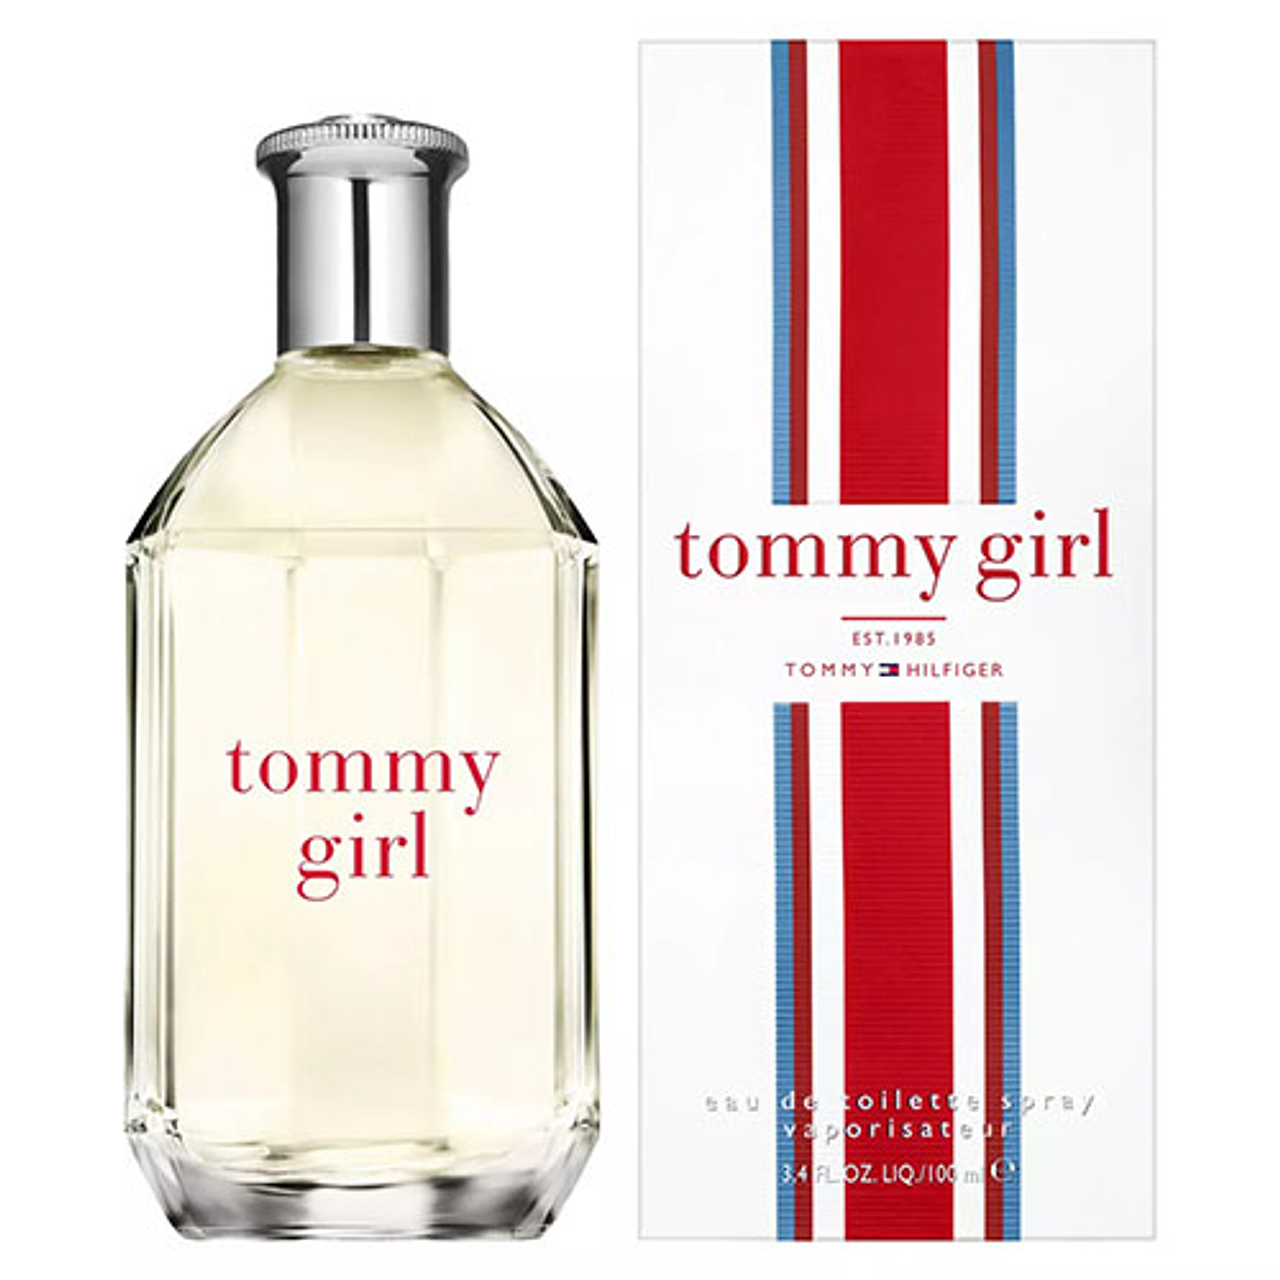 PERFUME MUJER IND TOMMY HILFIGER GIRL 100ML